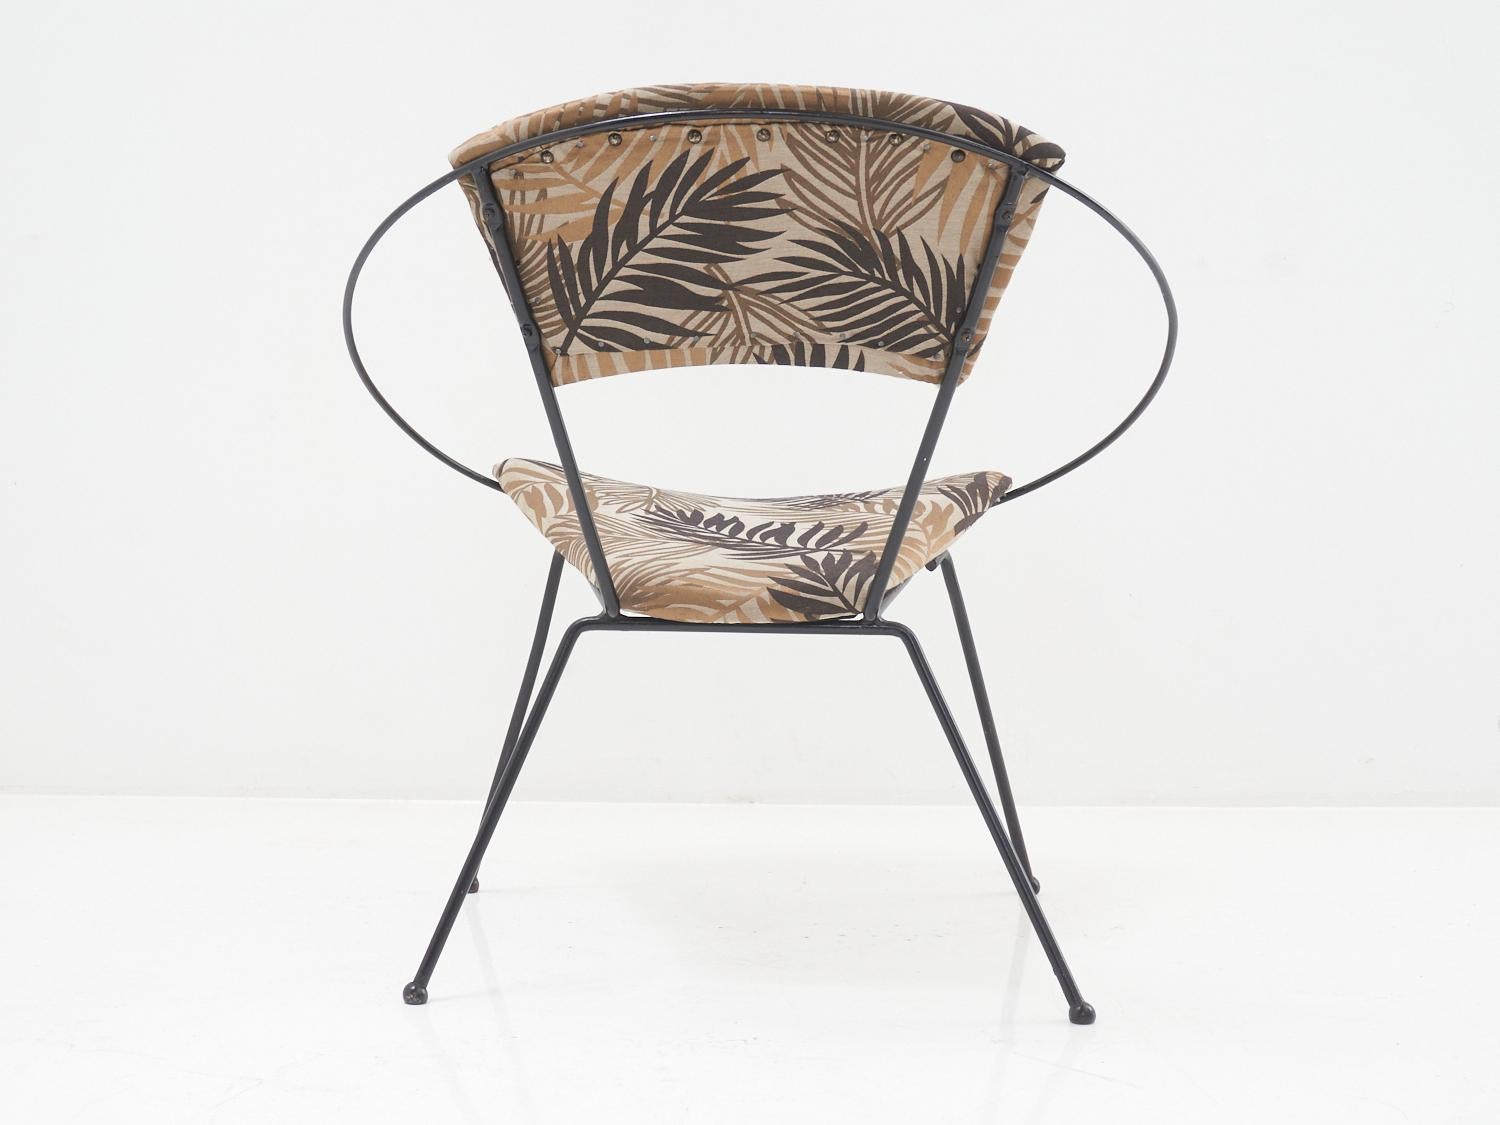 Late 20th Century Mid-Century Modern Hoop Chair, 1970s For Sale